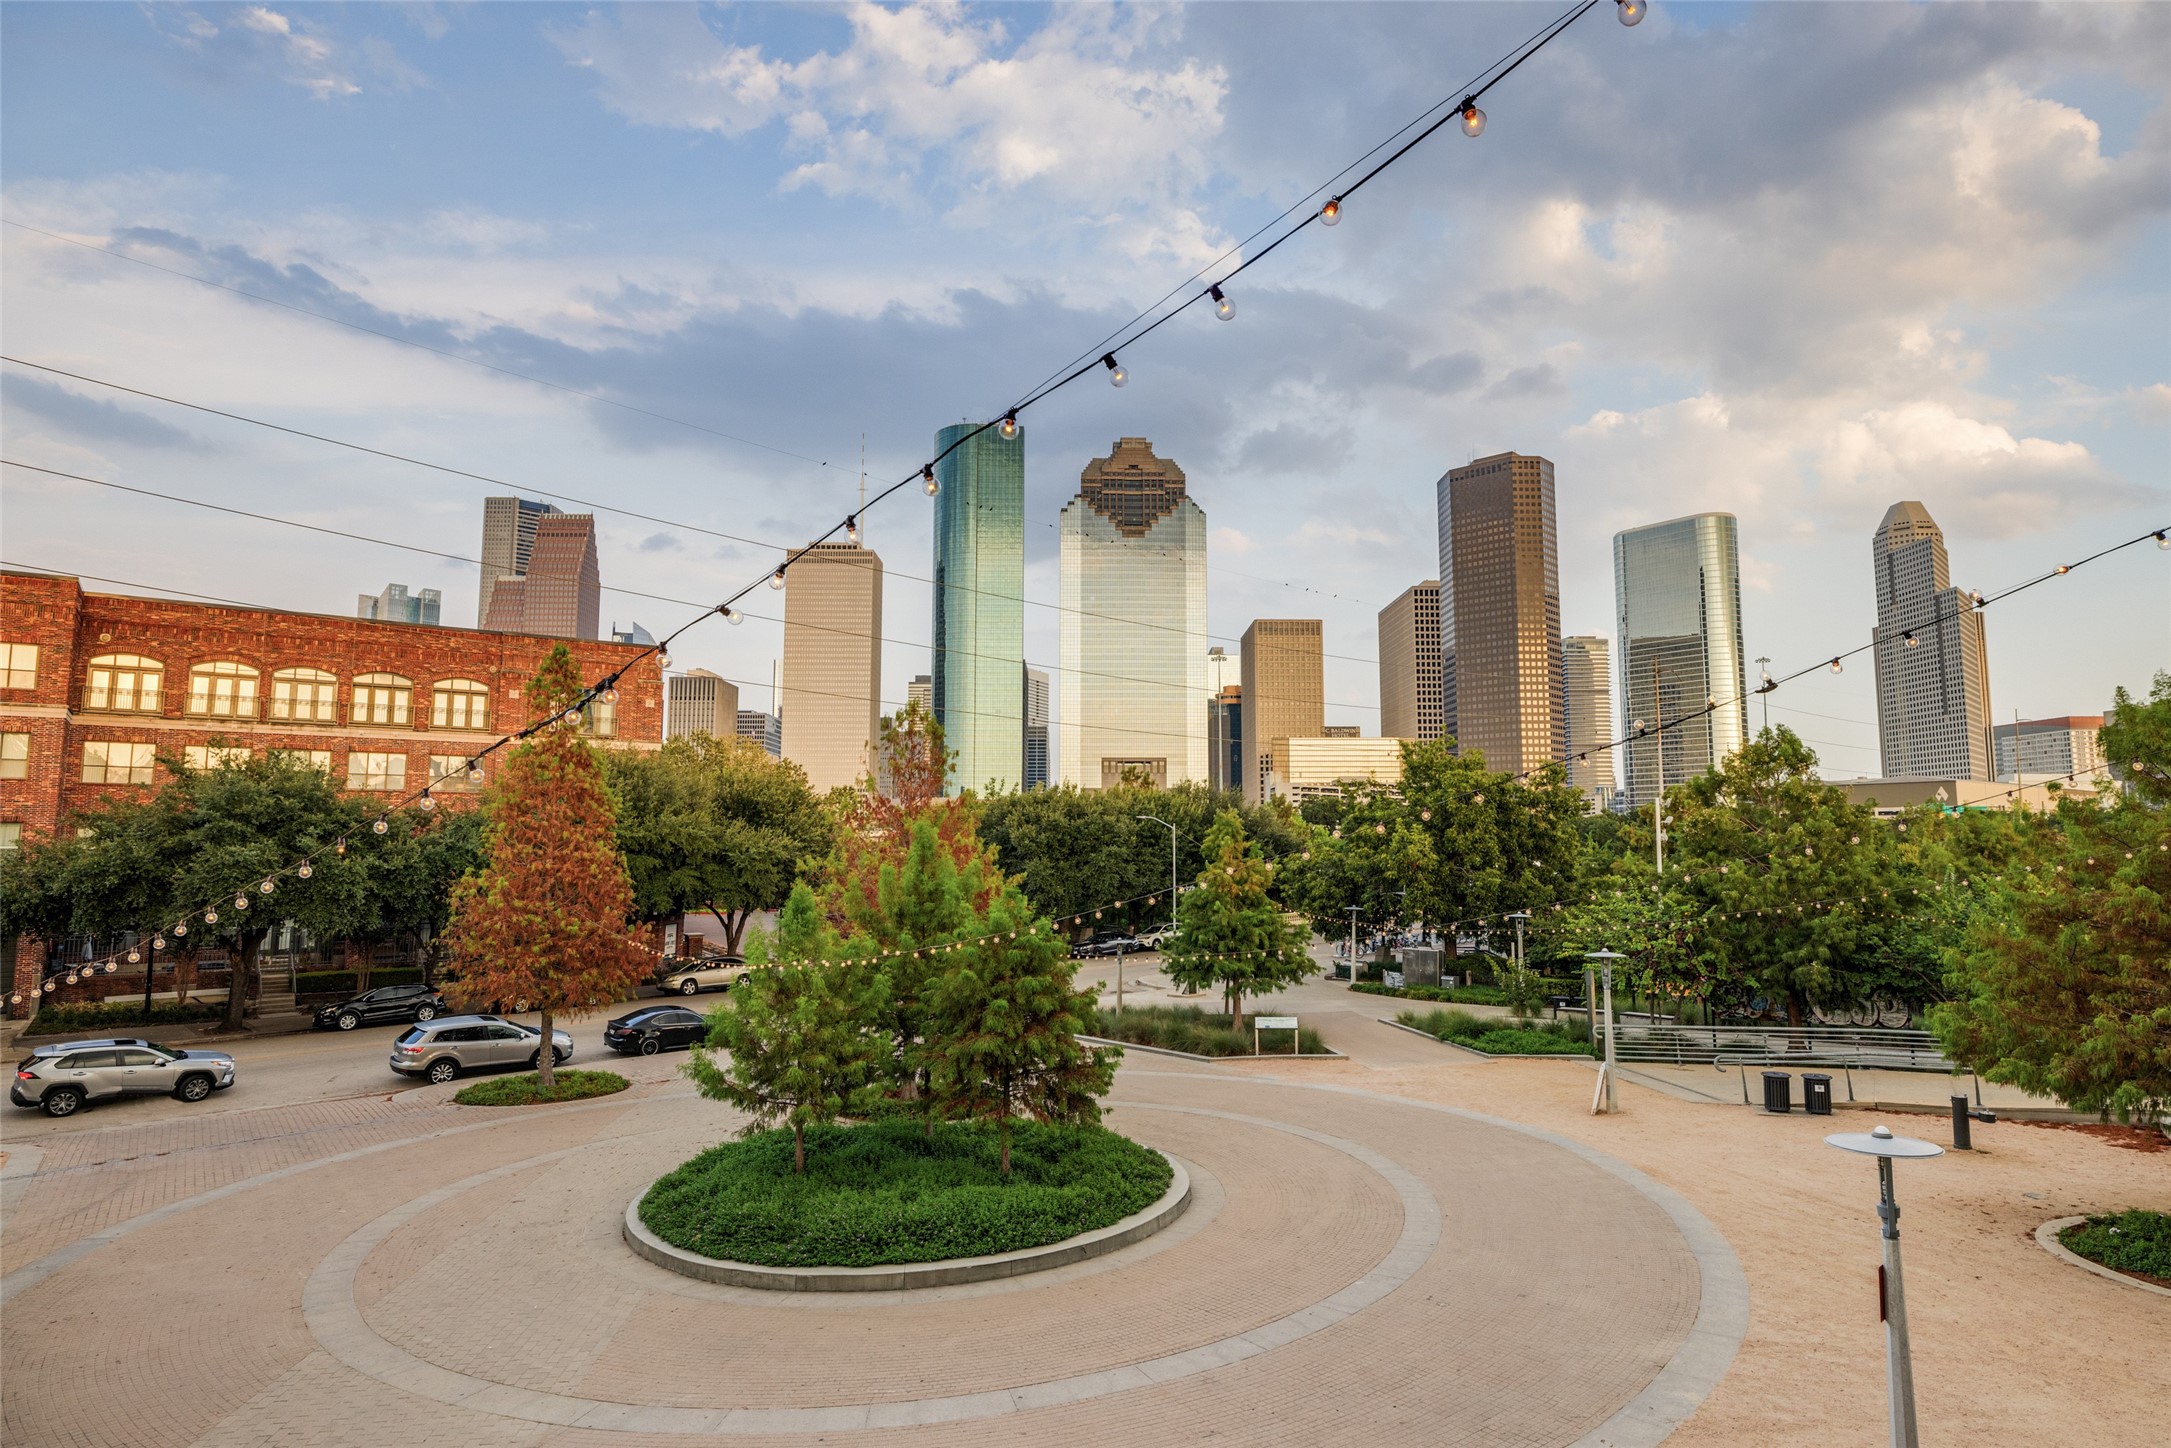 Buffalo Bayou Park is minutes away. Enjoy all the perks of being right outside of Downtown Houston. From the Skate park to the Cistern, Boat tours, Bike tours, Music events, volleyball, dog park, and Flora Restaurant; it all encompasses the 52-mile waterway!!